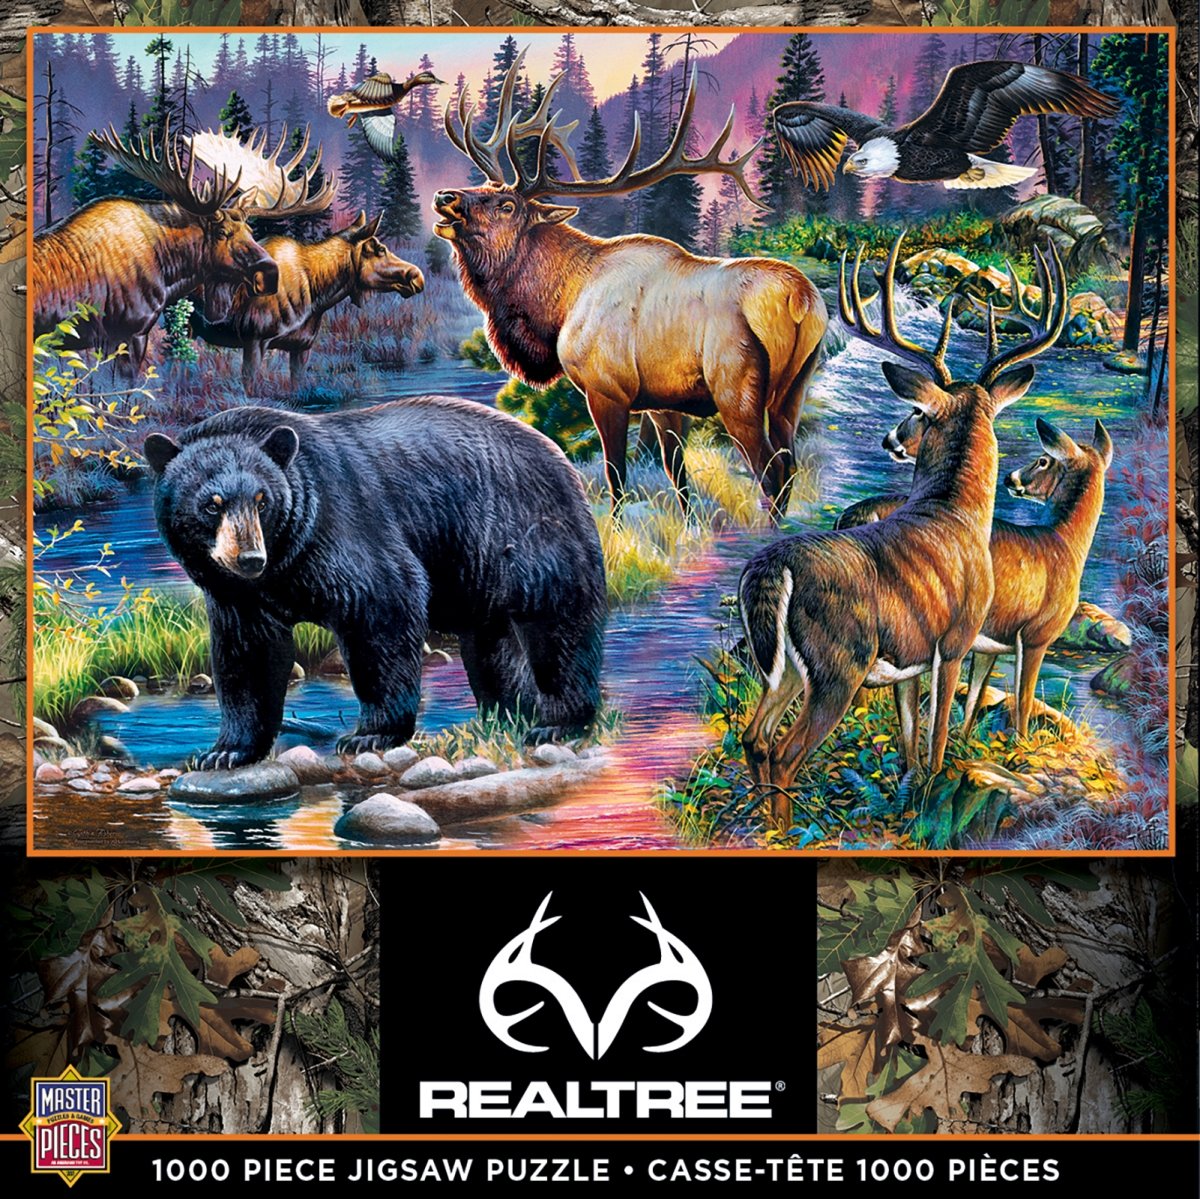 71940 19.25 X 26.75 In. Realtree Wild Living Jigsaw Puzzle - 1000 Piece